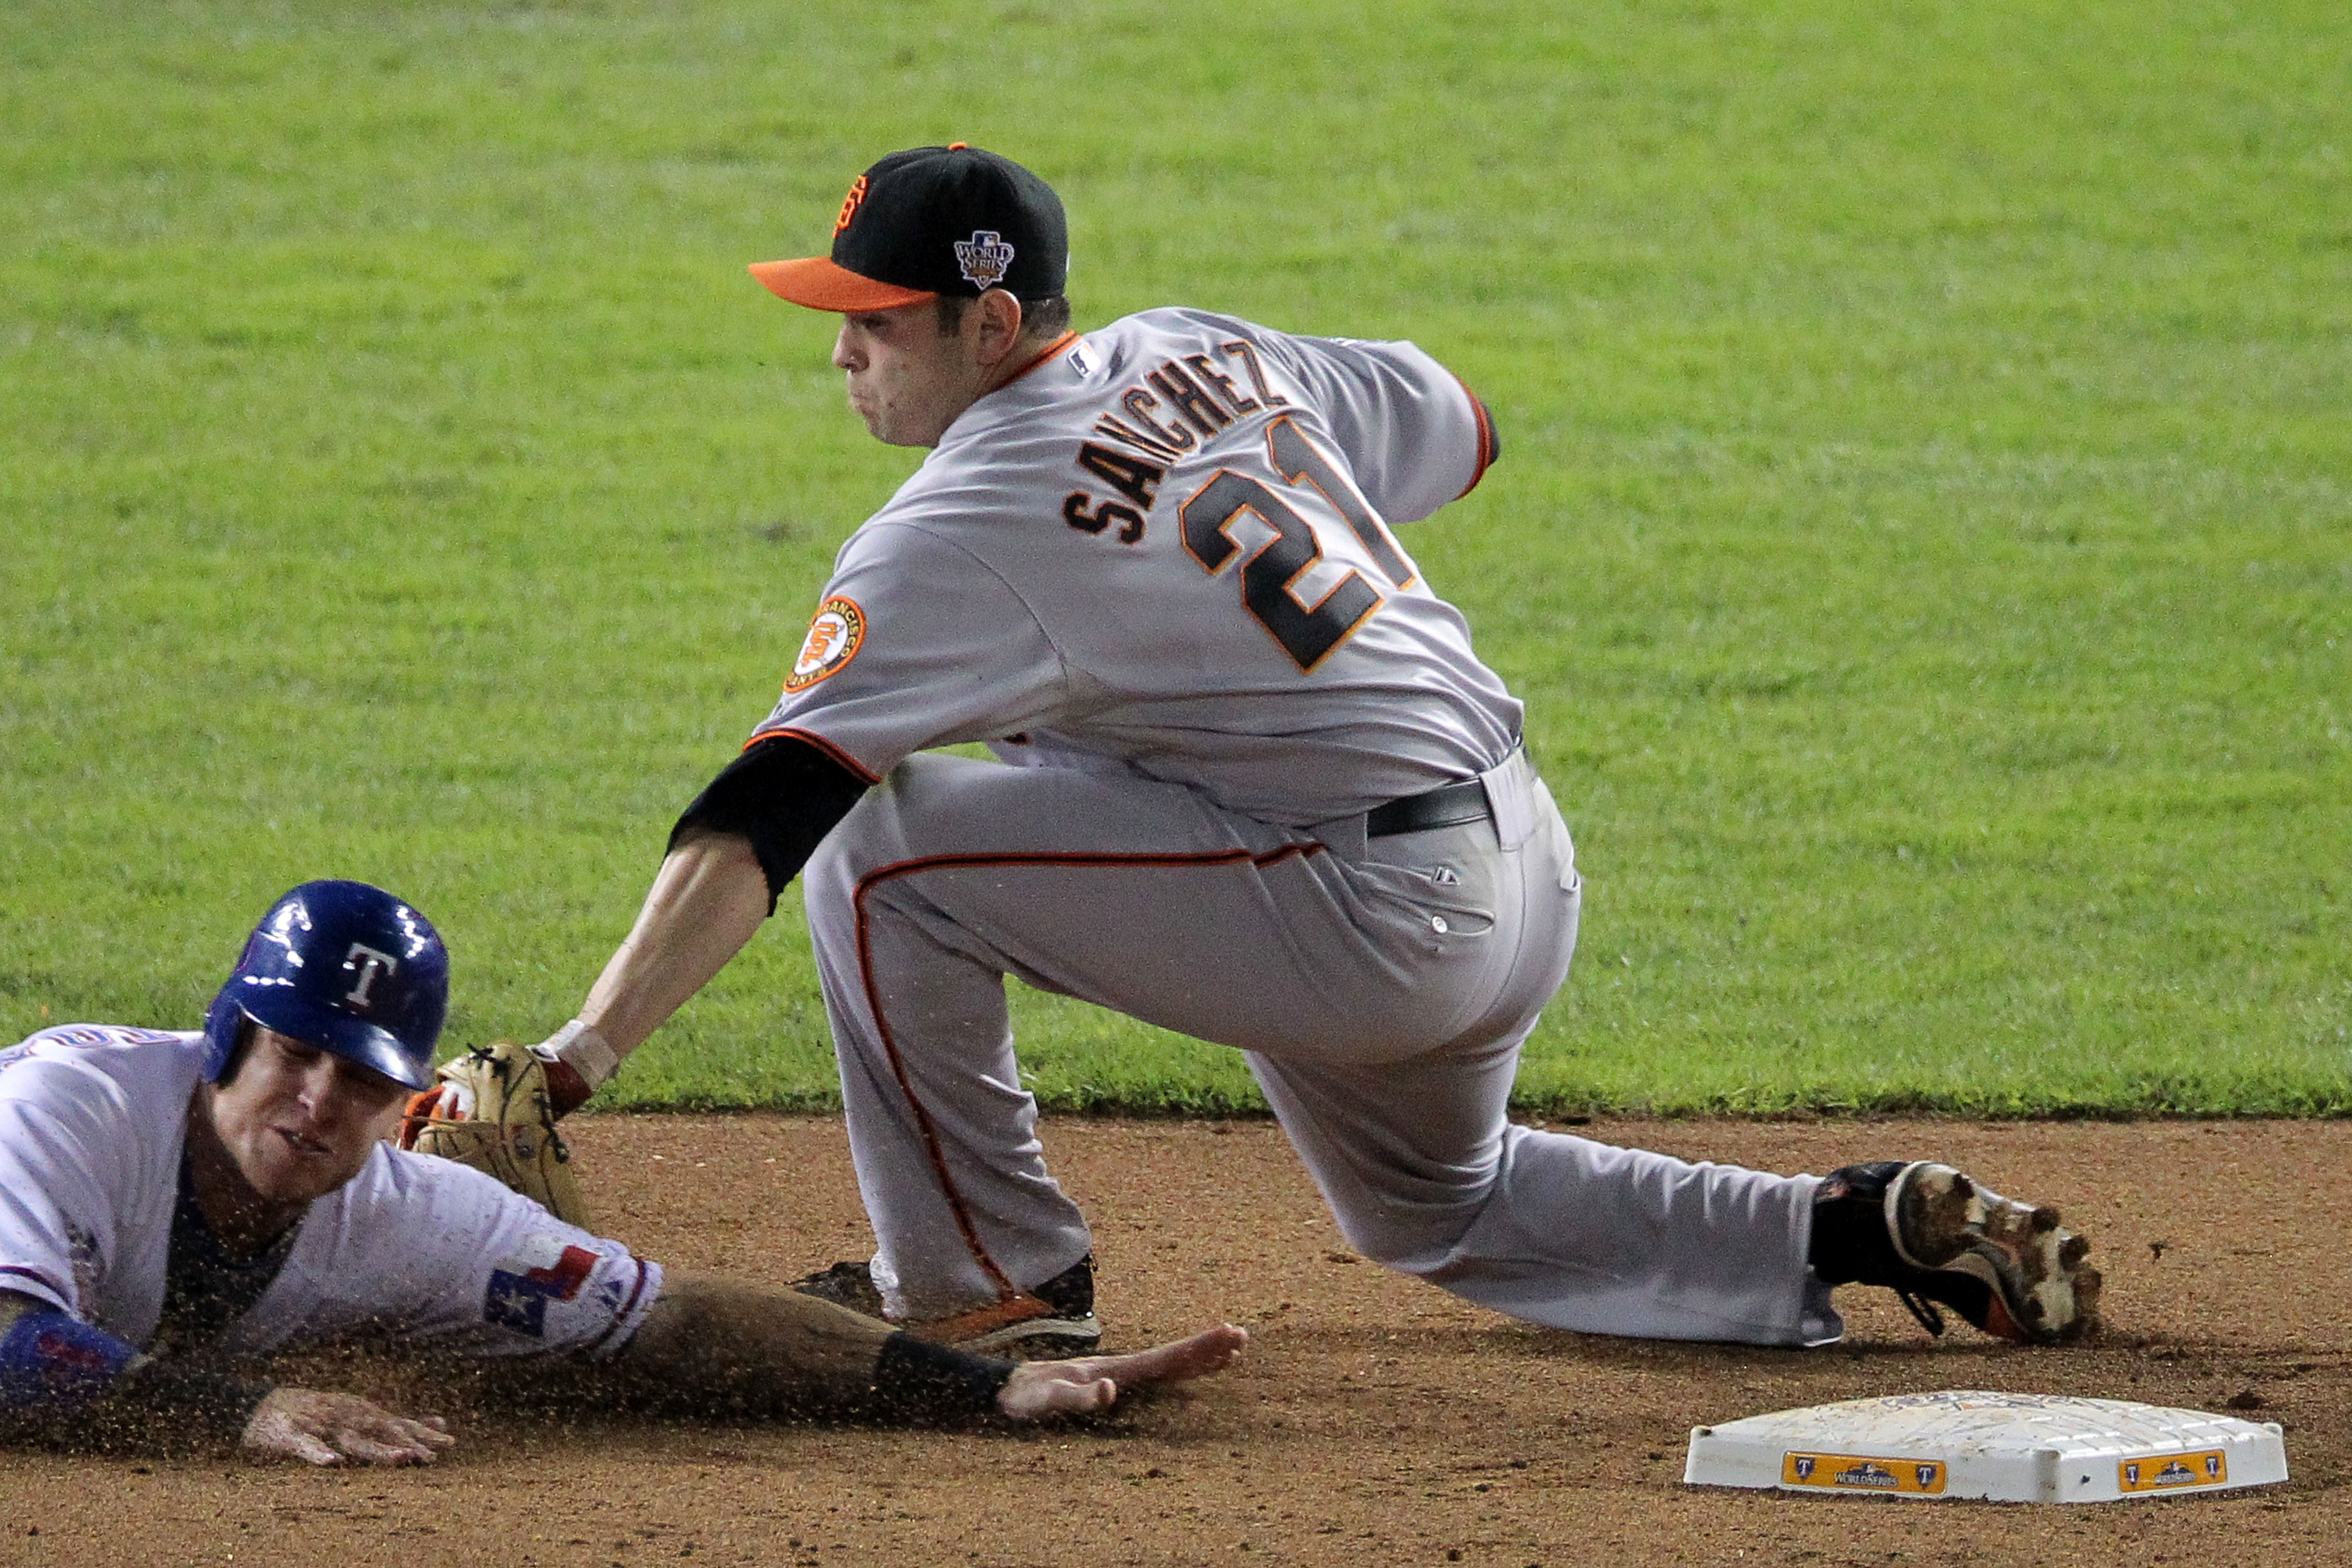 Photo: Giants' Freddy Sanchez tags out Texas Rangers' Josh Hamilton in game  4 of the World Series in Texas - DAL20101031350 